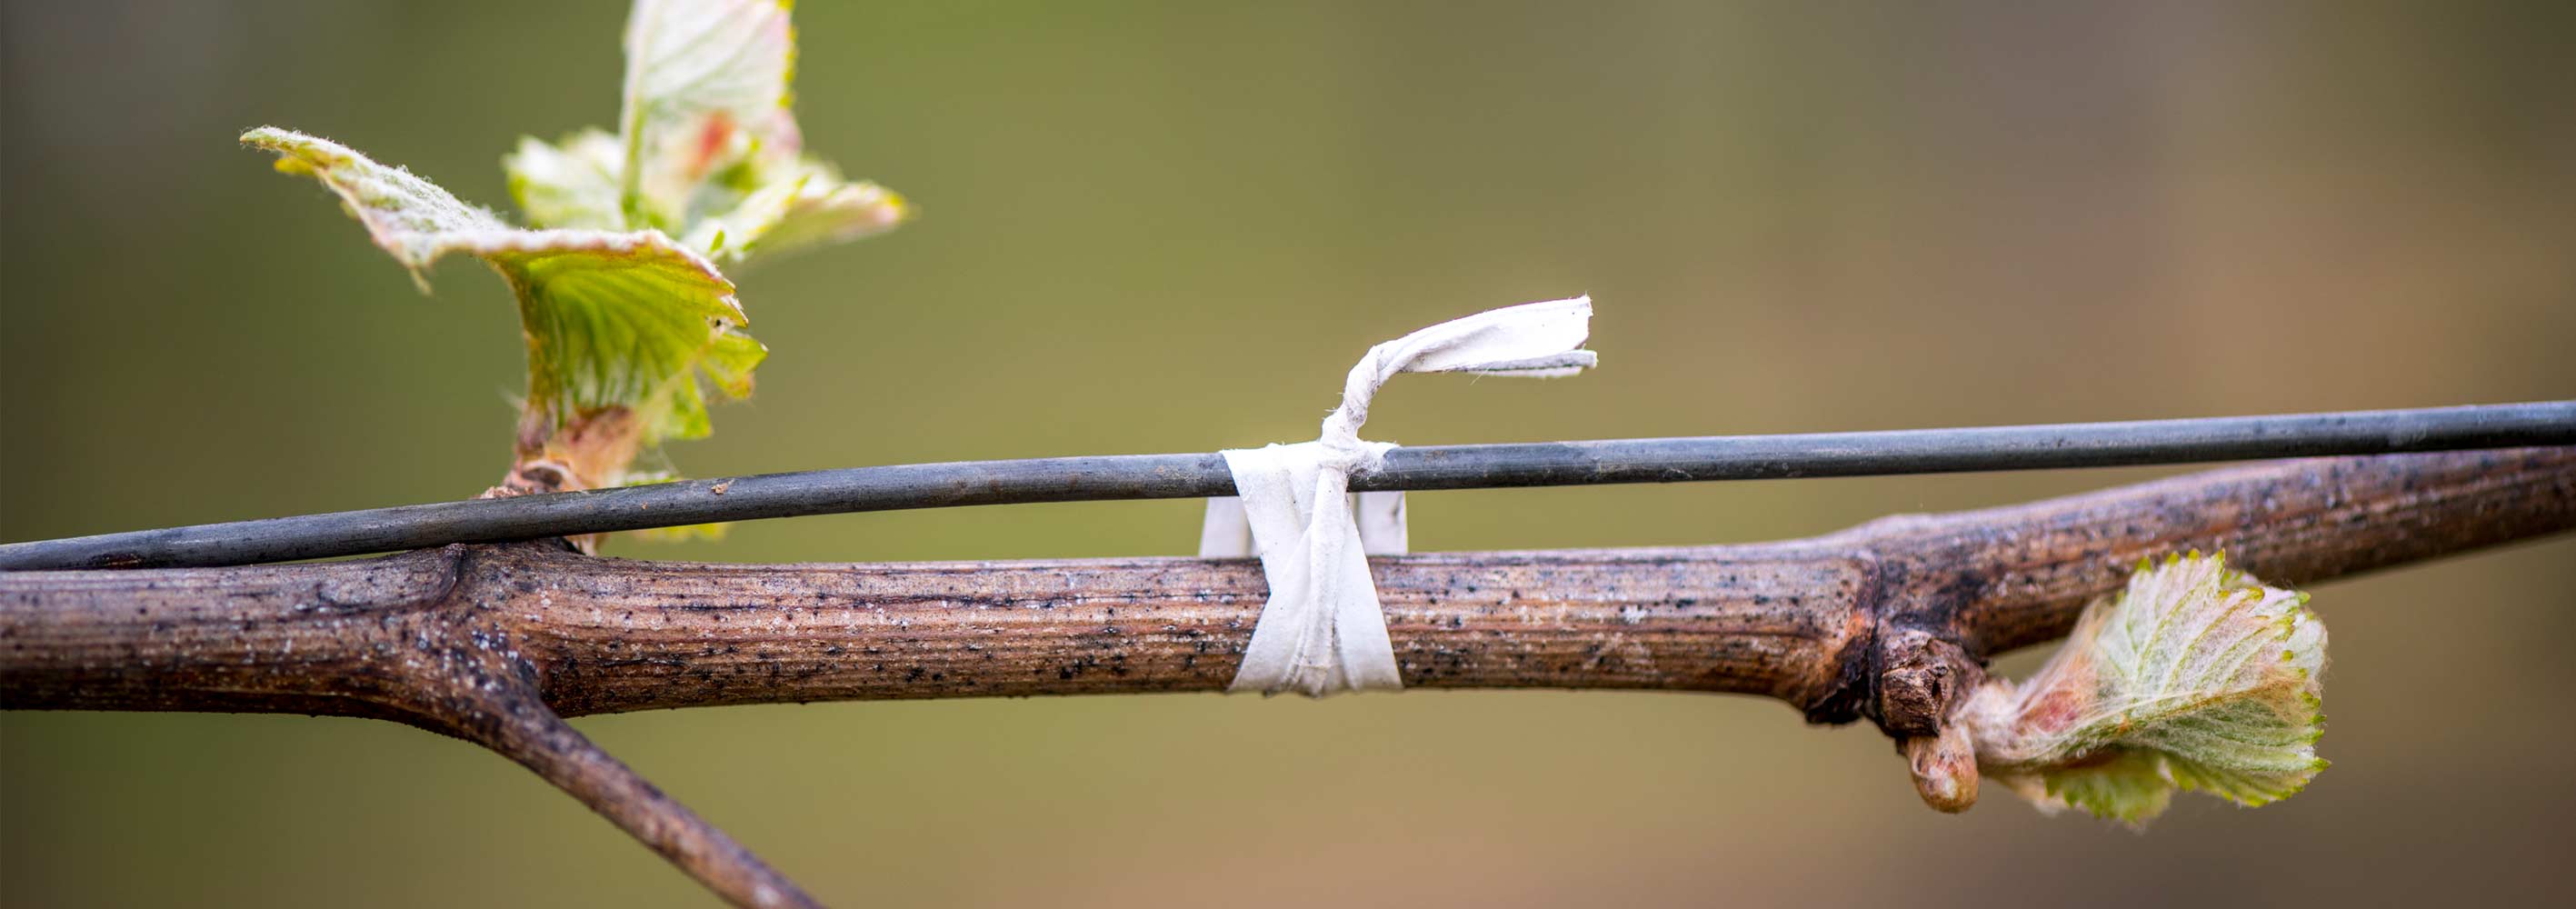 Cobb Wines grapevines budding early in the growing season